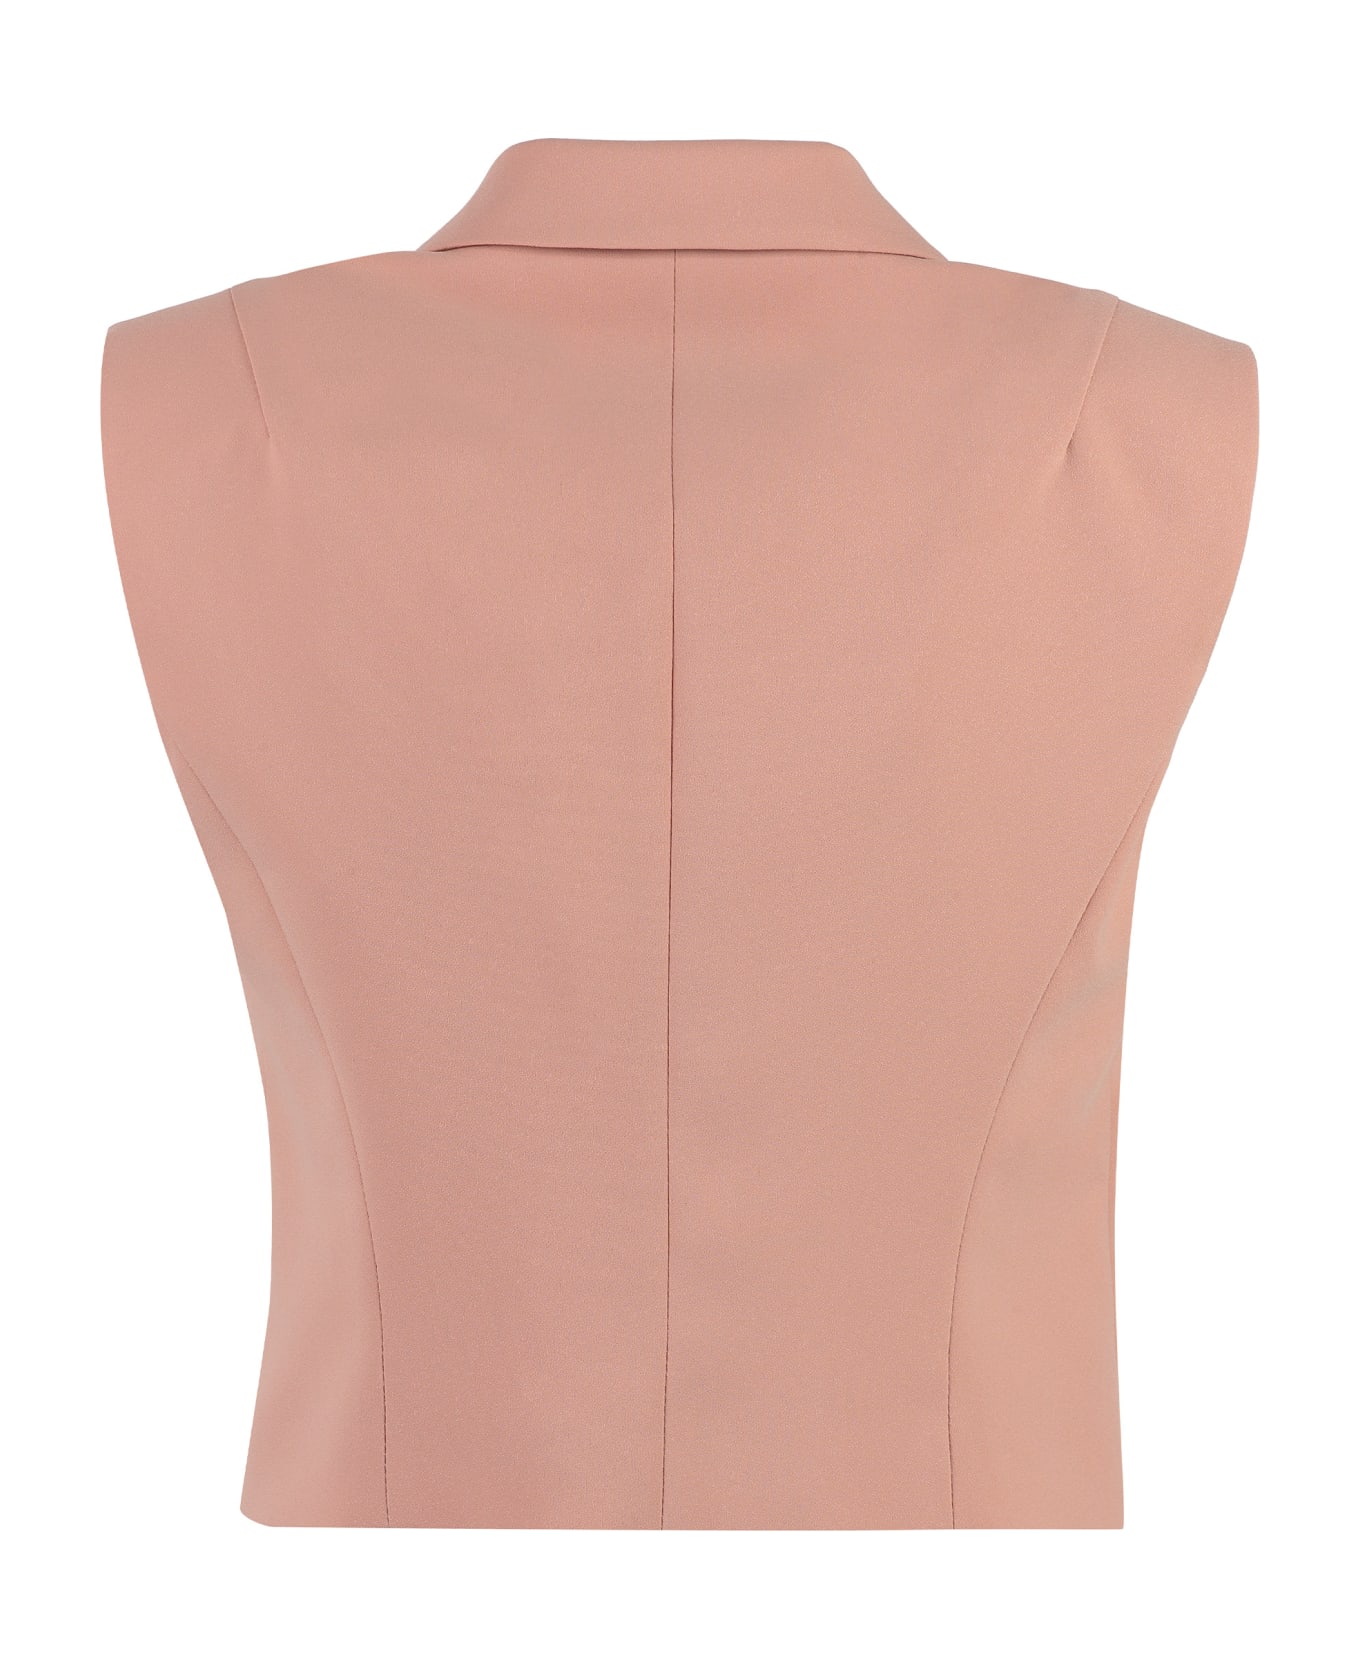 Pinko Double-breasted Waistcoat - Pink ブレザー